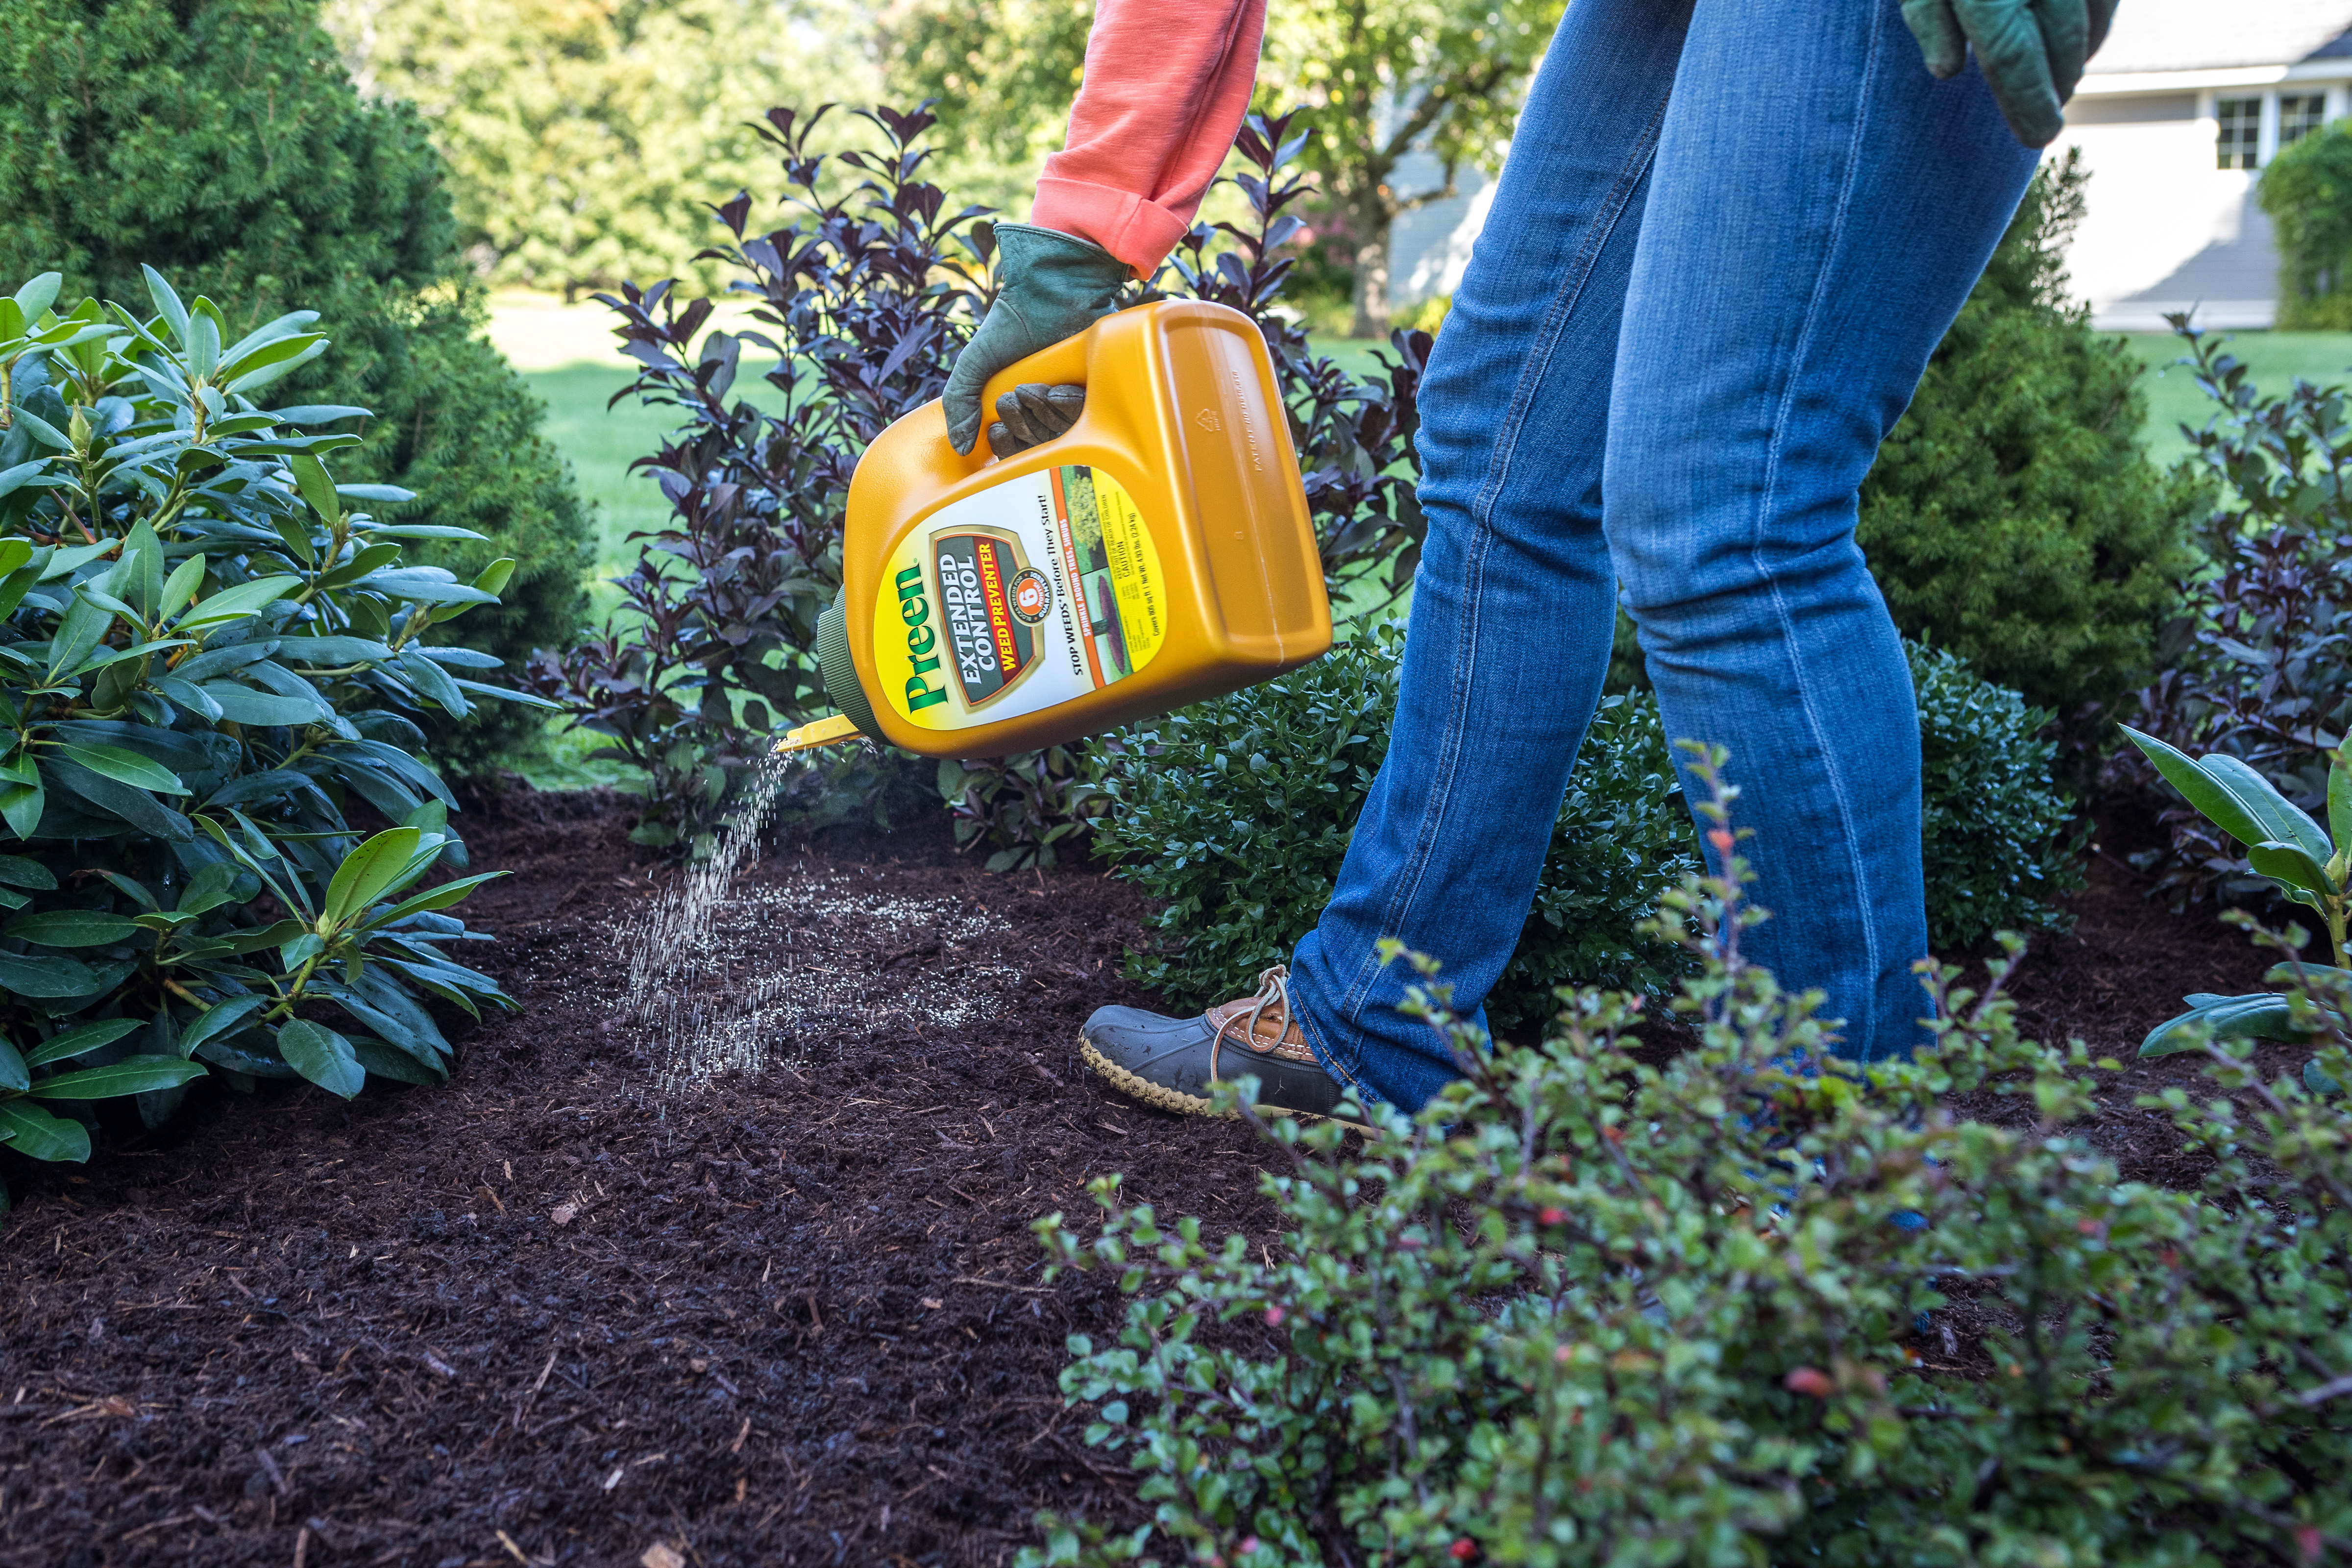 Applying Preen Extended Control Weed Preventer around shrubs over mulch to control weeds